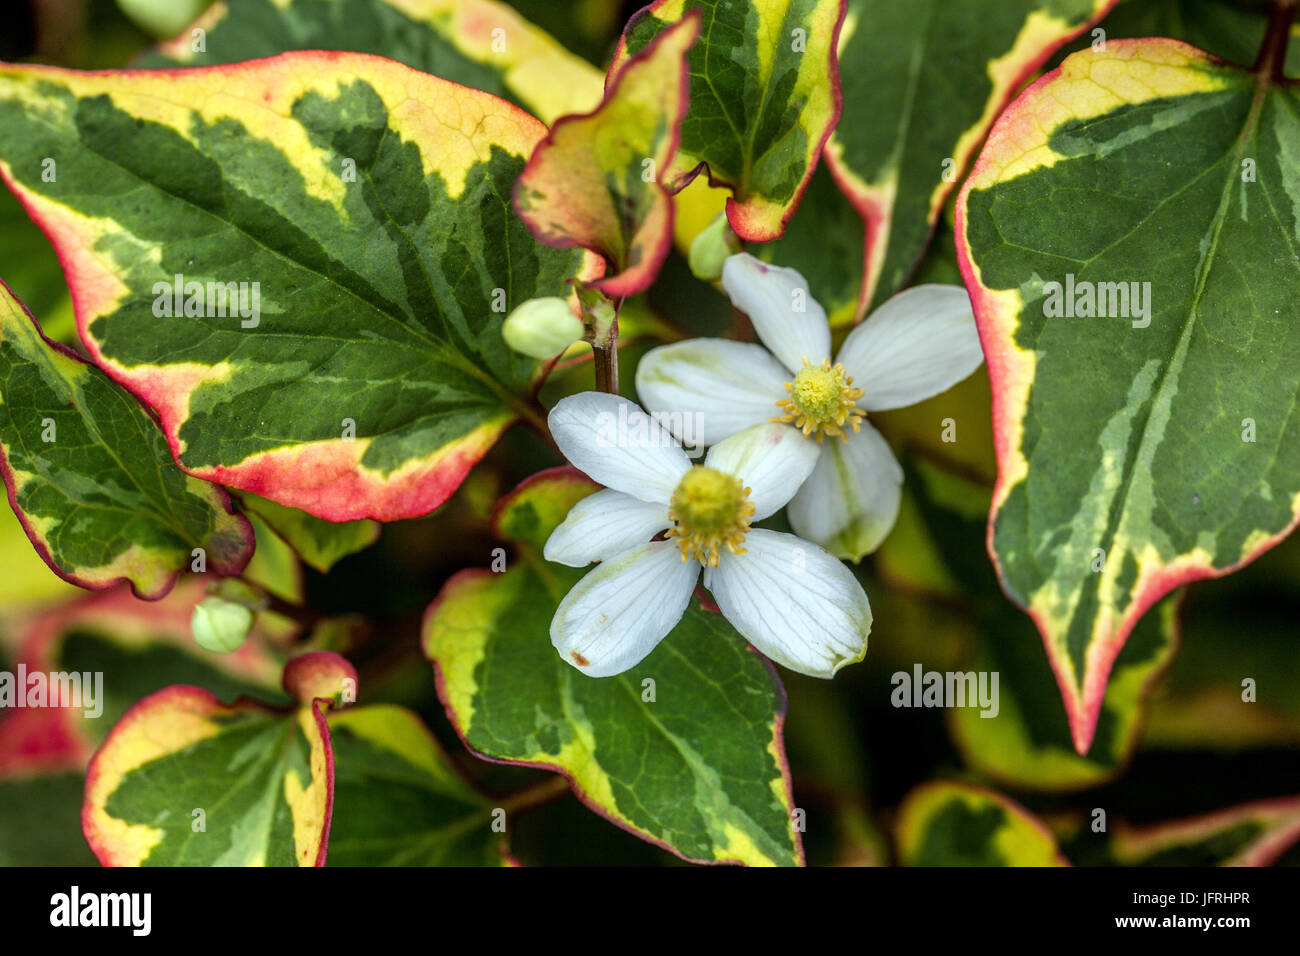 Chameleon Plant, Houttuynia cordata, flower and leaves Stock Photo